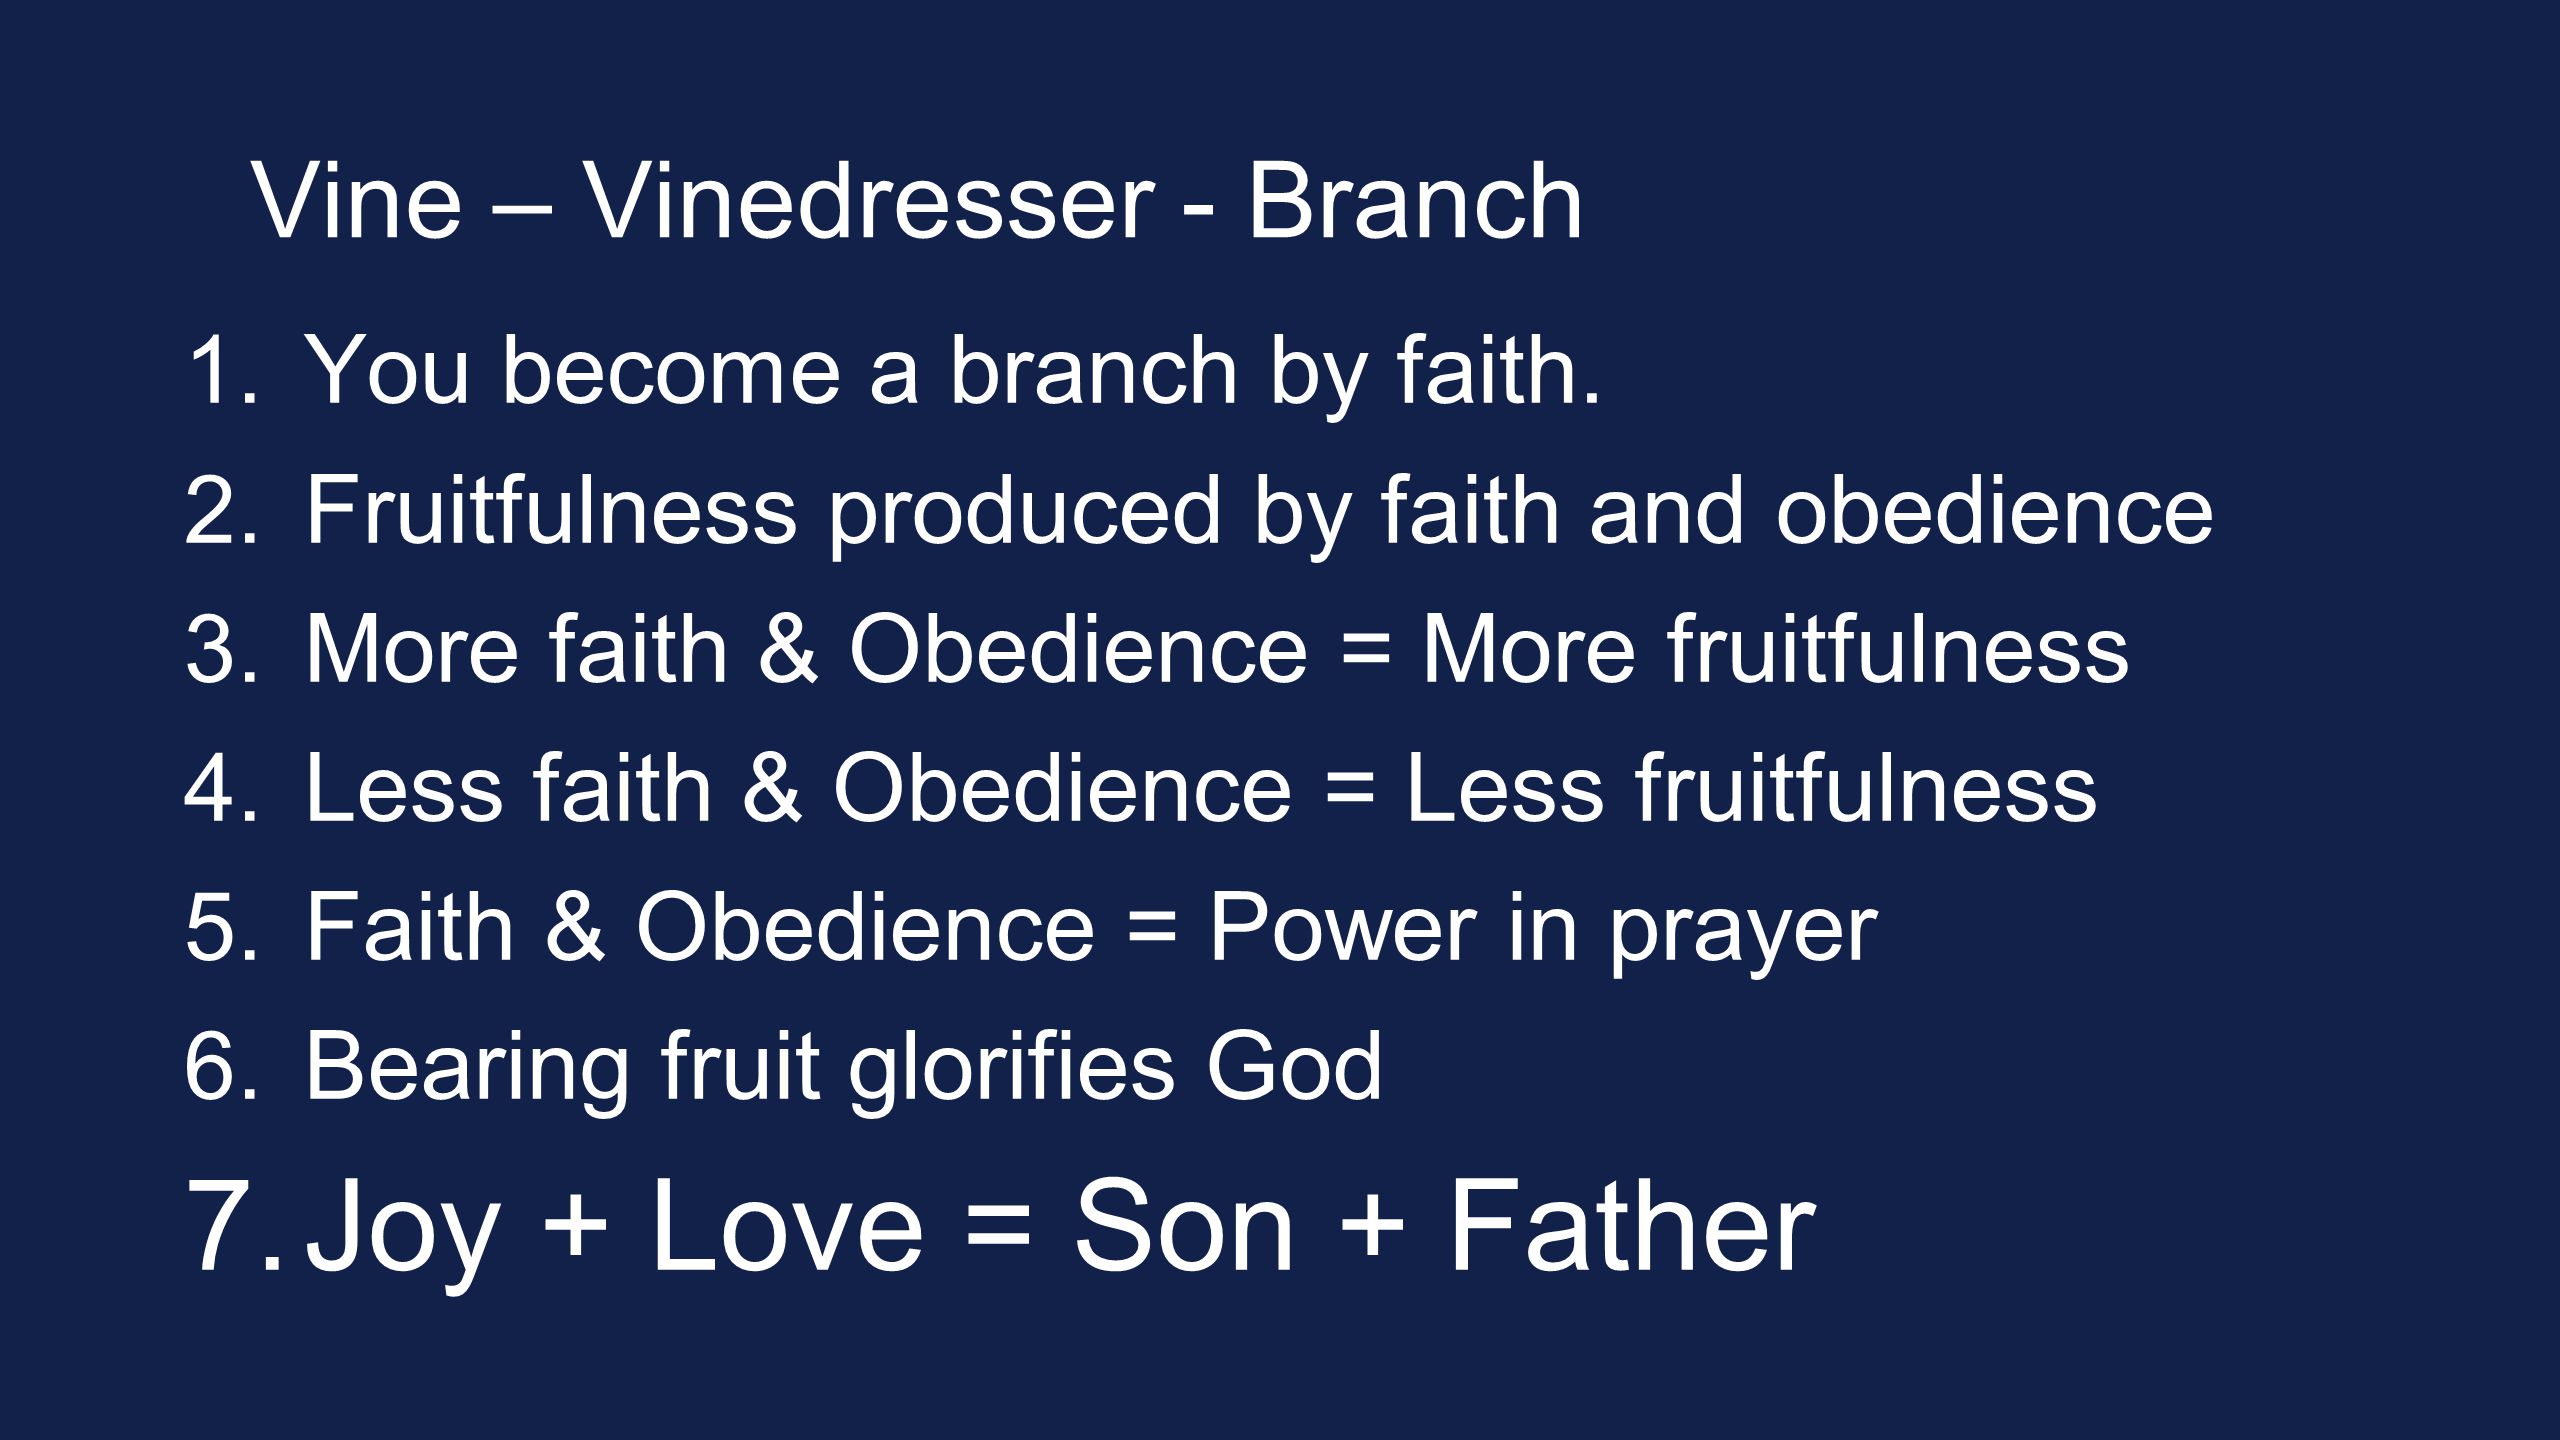 Vine – Vinedresser - Branch 1. You become a branch by faith.